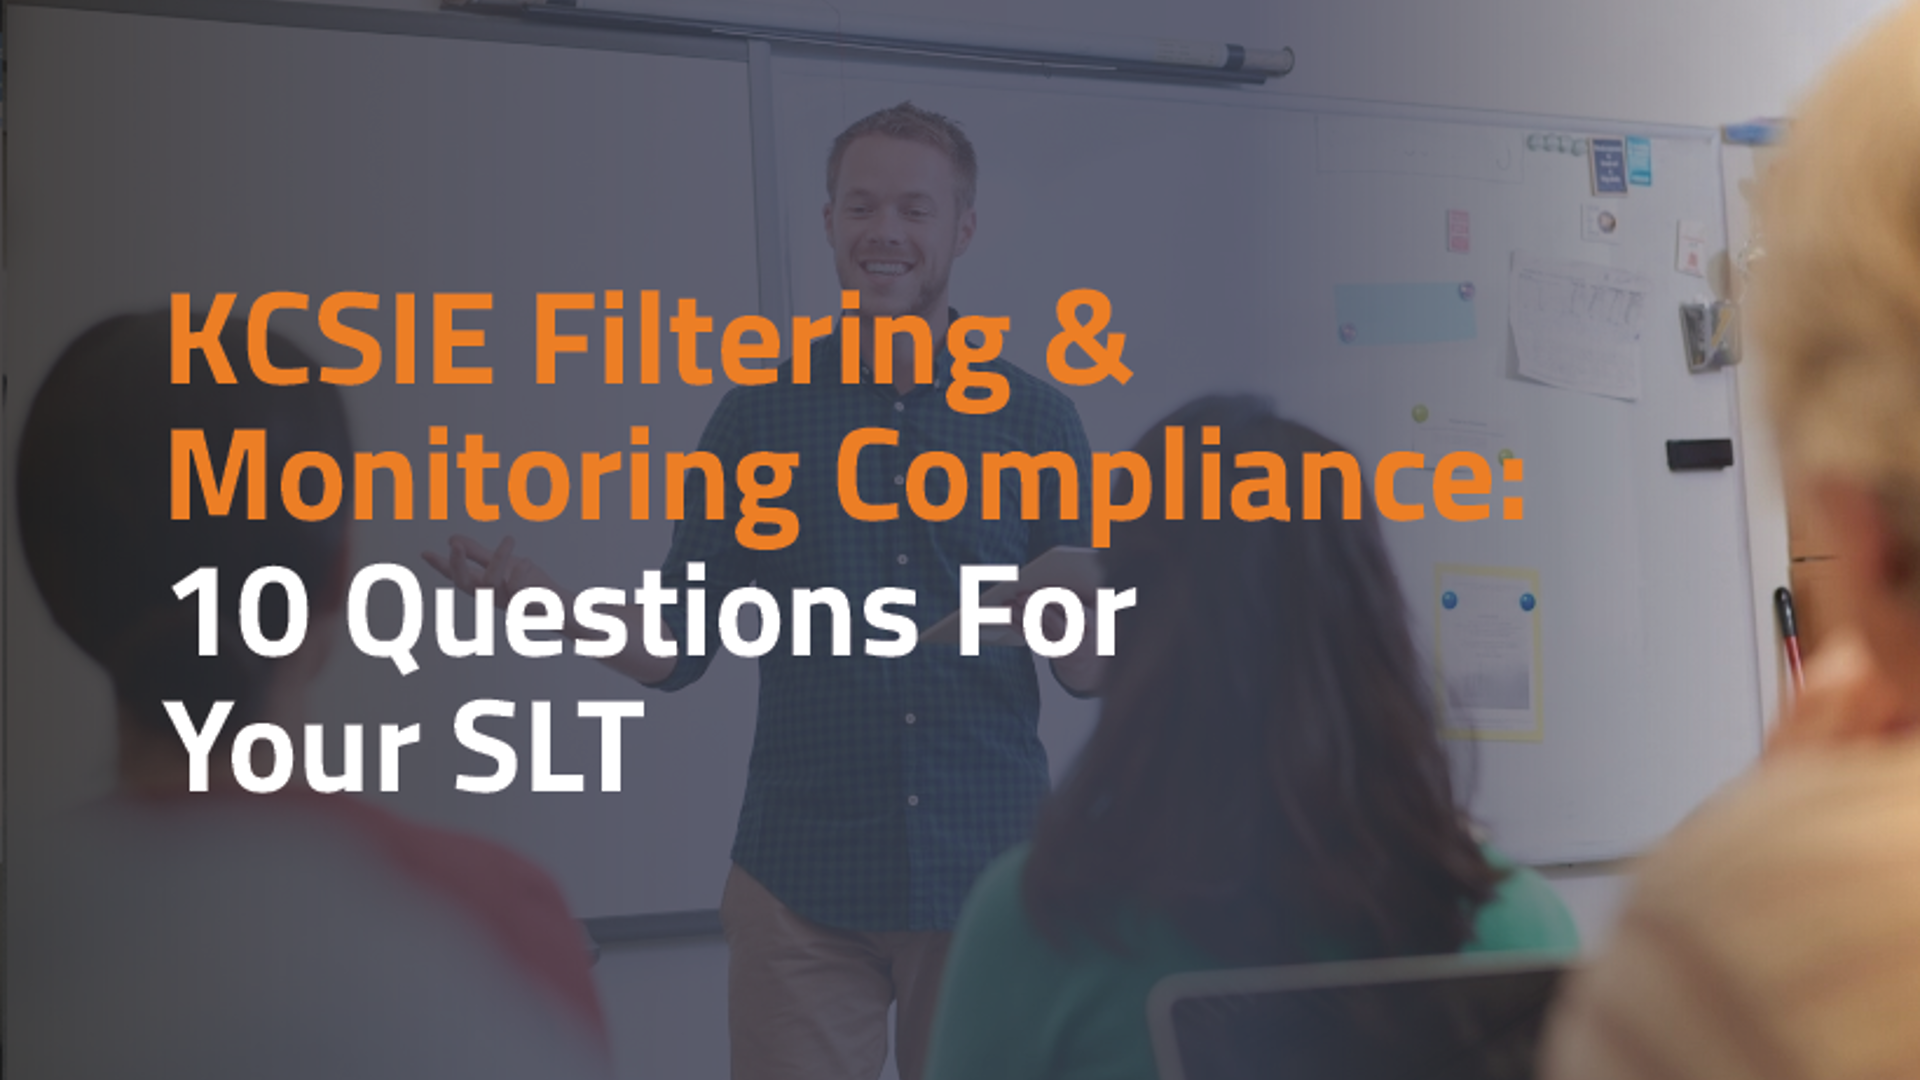 Comply with KCSIE filtering and monitoring: 10 important questions for your SLT